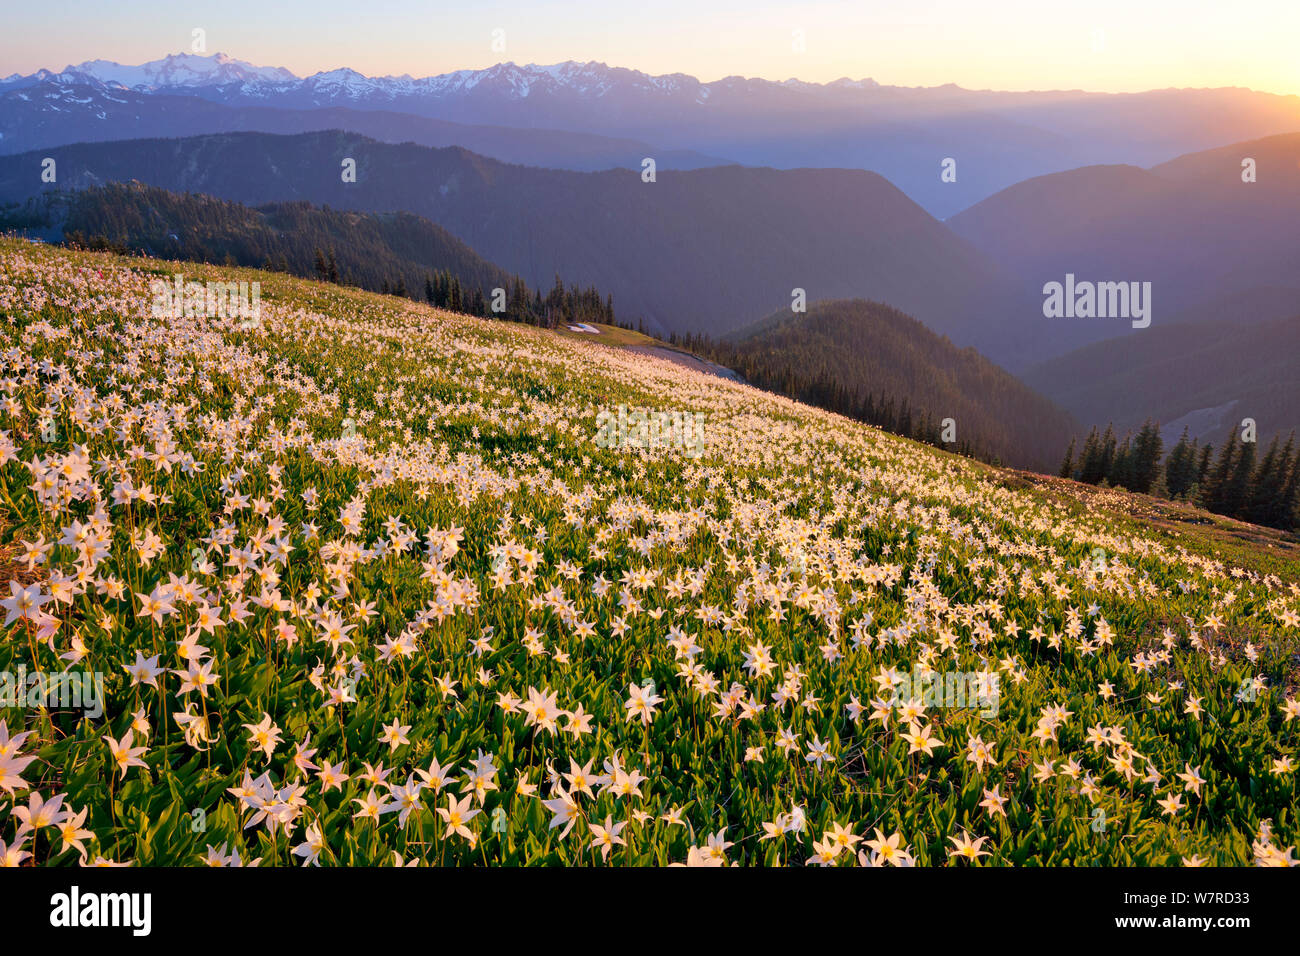 Fields of Avalanche Lilies (Erythronium montanum) in the fading sunset light high on the slopes of the Olympic mountains with a view of Mt Olympus (far left) in Olympic National Park, Washington, USA, July 2013 Stock Photo